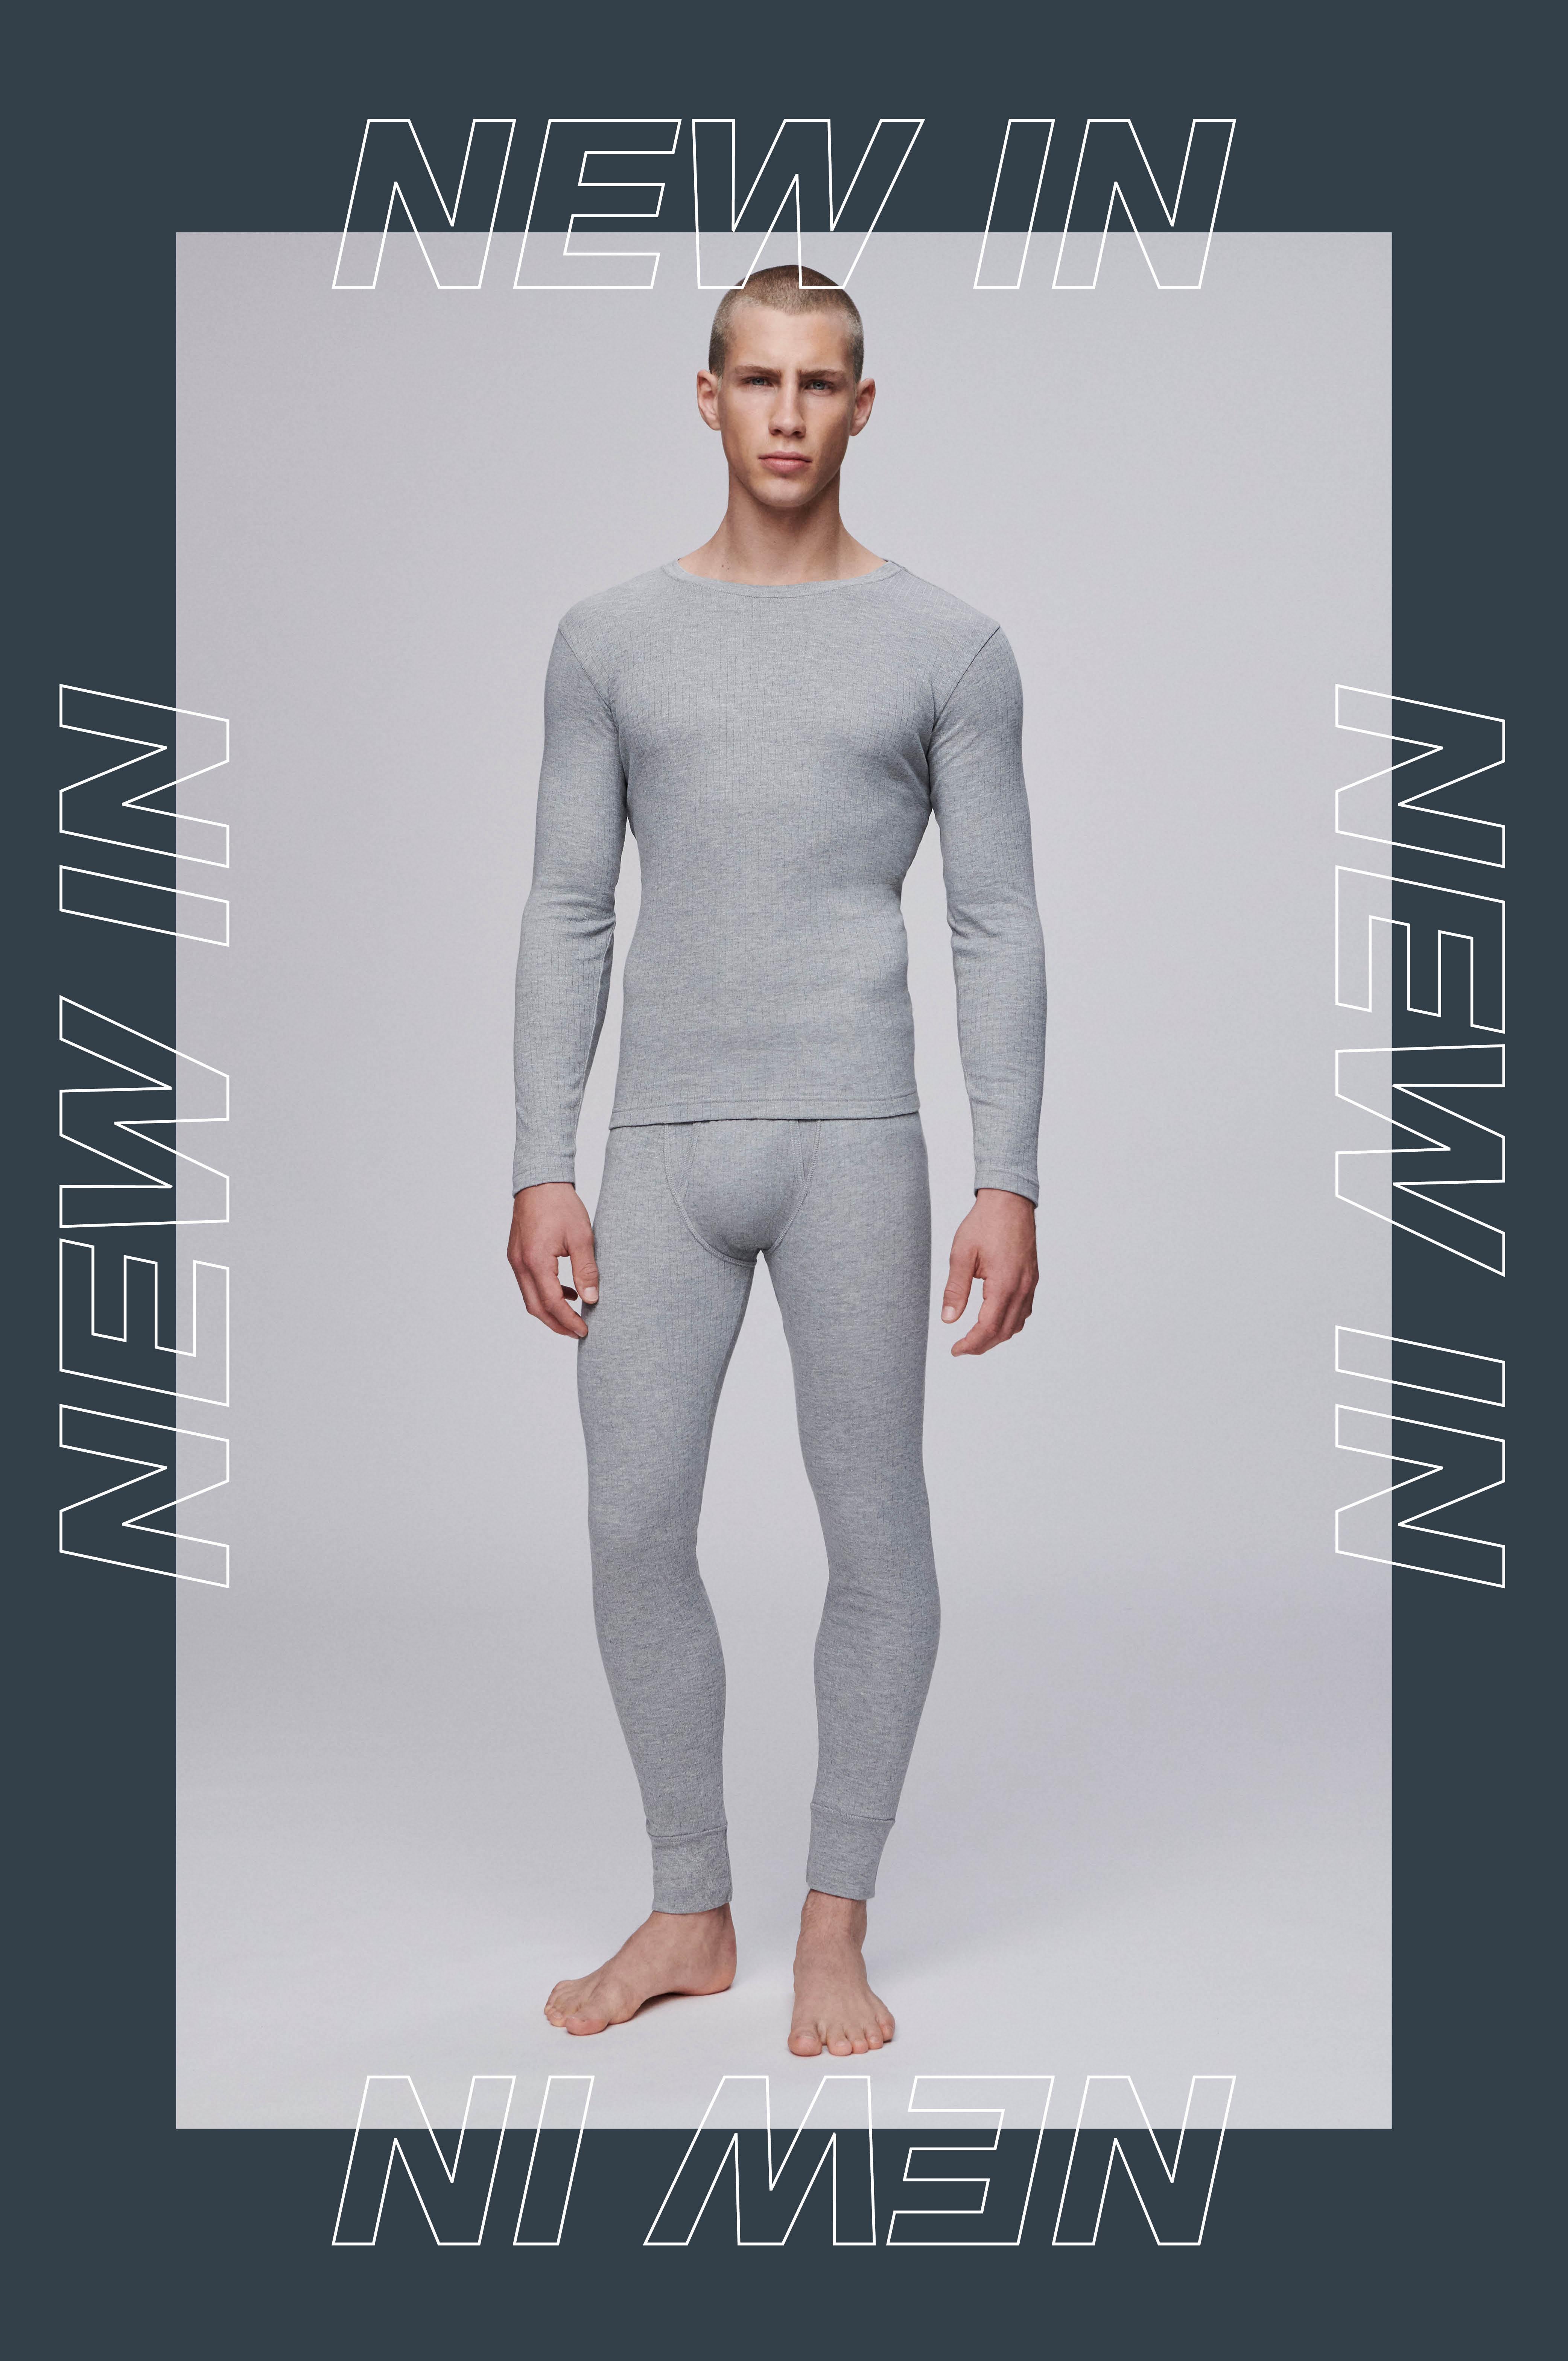 Male model in grey thermals